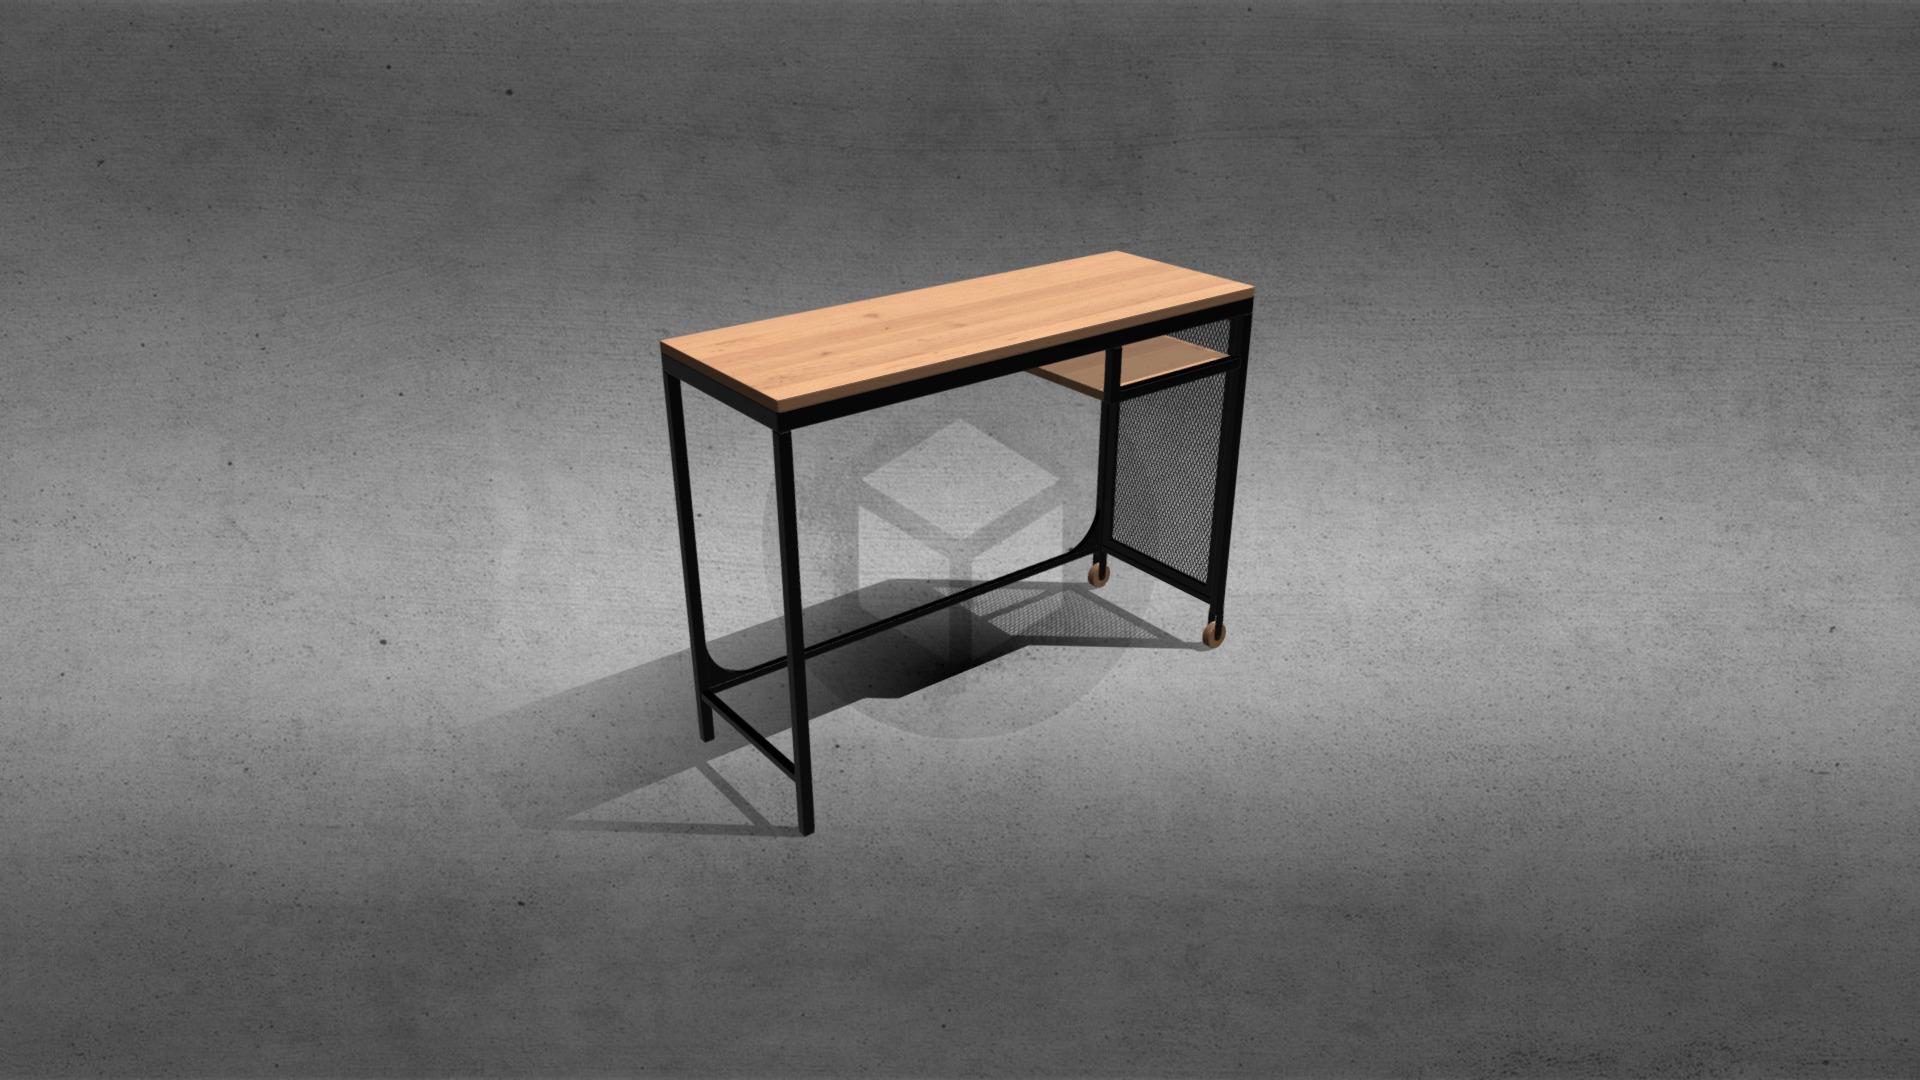 3D model Fjallbo Table – Fjallbo mesa - This is a 3D model of the Fjallbo Table - Fjallbo mesa. The 3D model is about a small table on a carpet.